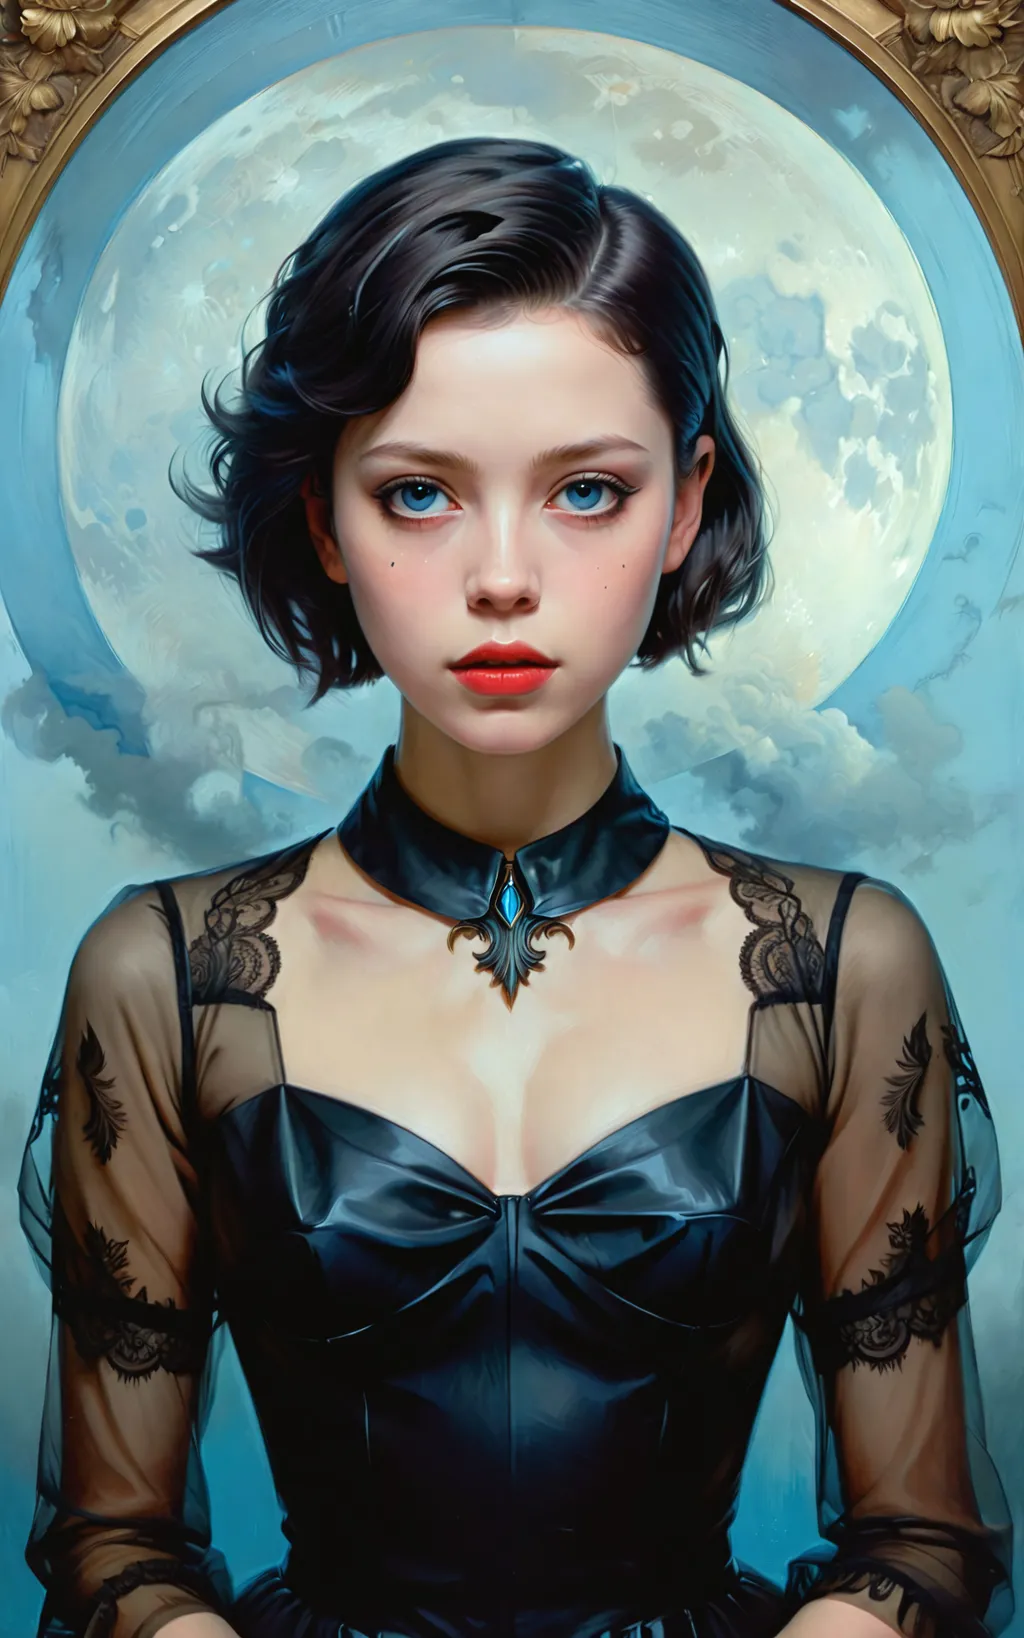 Prompt: Beautiful timid girlfriend Mia Goth crossed with Ava Max, brooding uneasy emotional, attractive, romanticism contemporary expressionism oil painting by Tom Bagshaw, by Aleksi Briclot, by Guillermo del Toro, by Antonio J. Manzanedo, by Peter Mohrbacher, by John Atkinson Grimshaw, photorealistic, breathtaking full-body masterpiece, black eyeliner, Smokey Eyeliner, awkward, reserved, demure, (girly tomboy out of her element), bright blue eyes, short pixie-cut haircut, Beautiful Macabre.